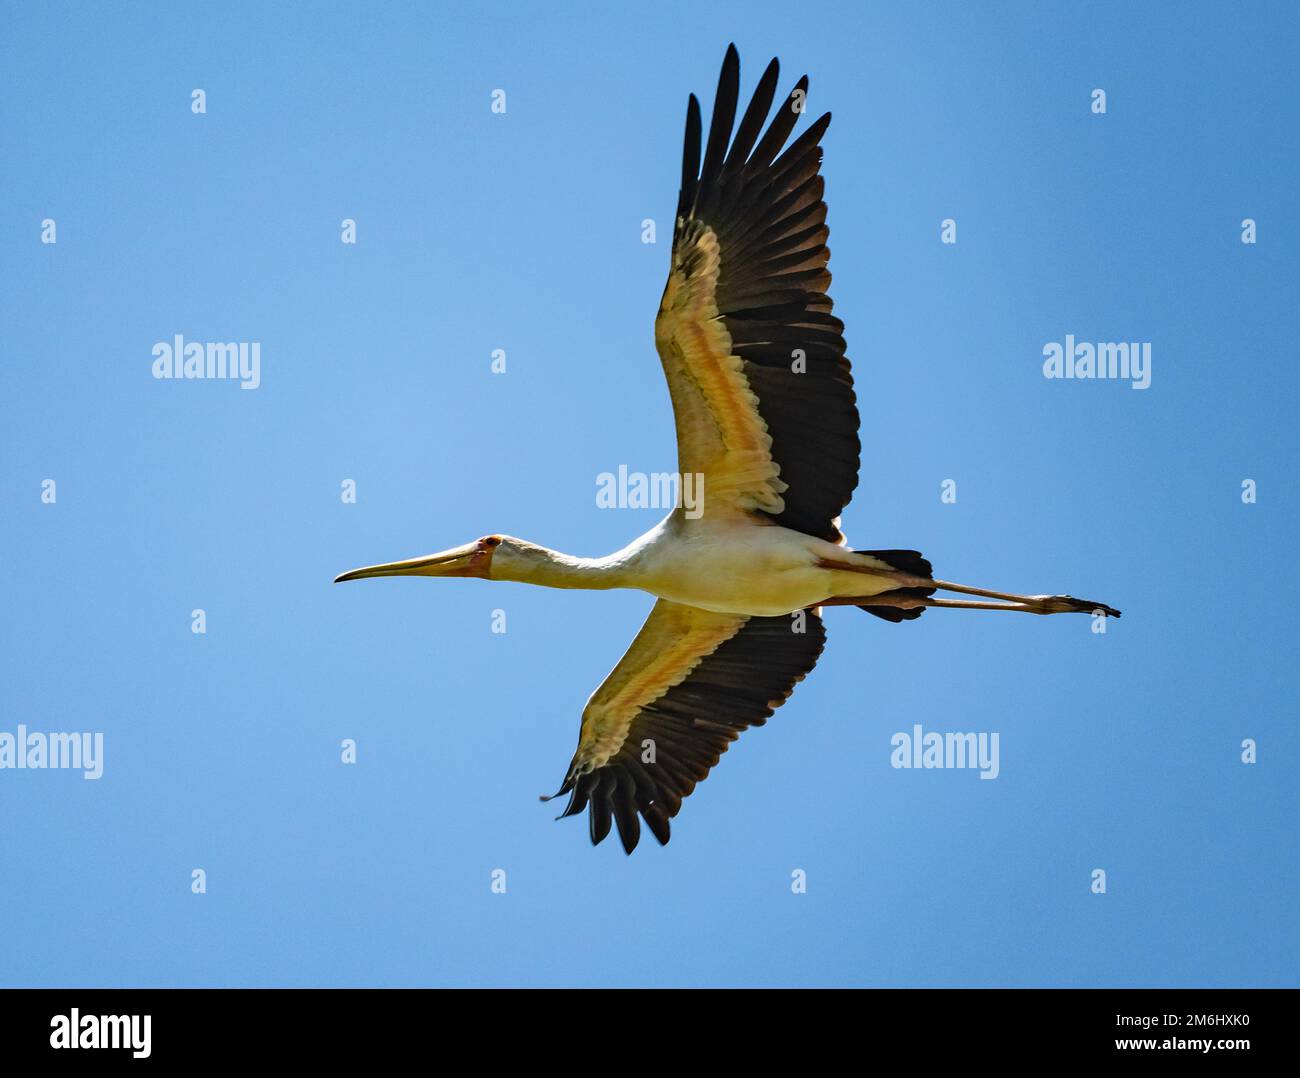 A Yellow-billed Stork (Mycteria ibis) flying in blue sky. Western Cape, South Africa. Stock Photo